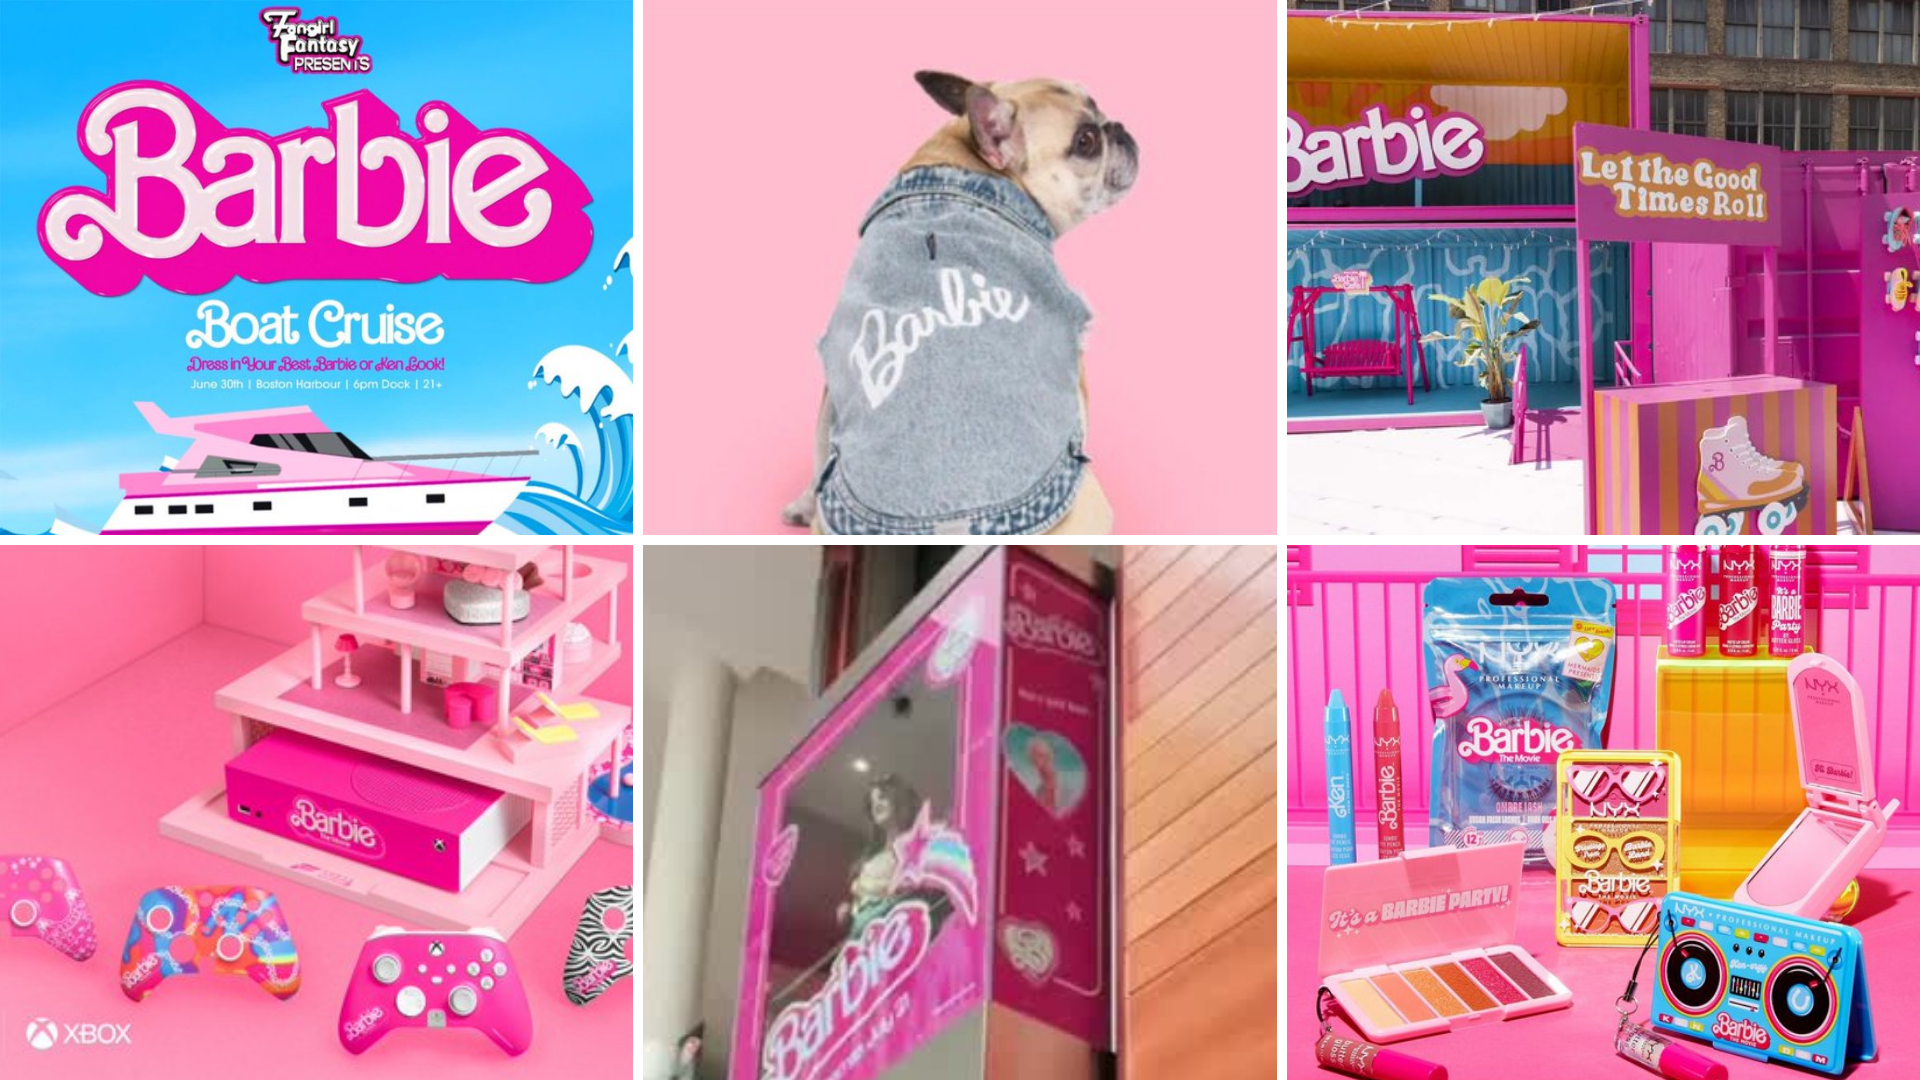 Examples of Barbie merchandising like toys, clothing, and accessories.